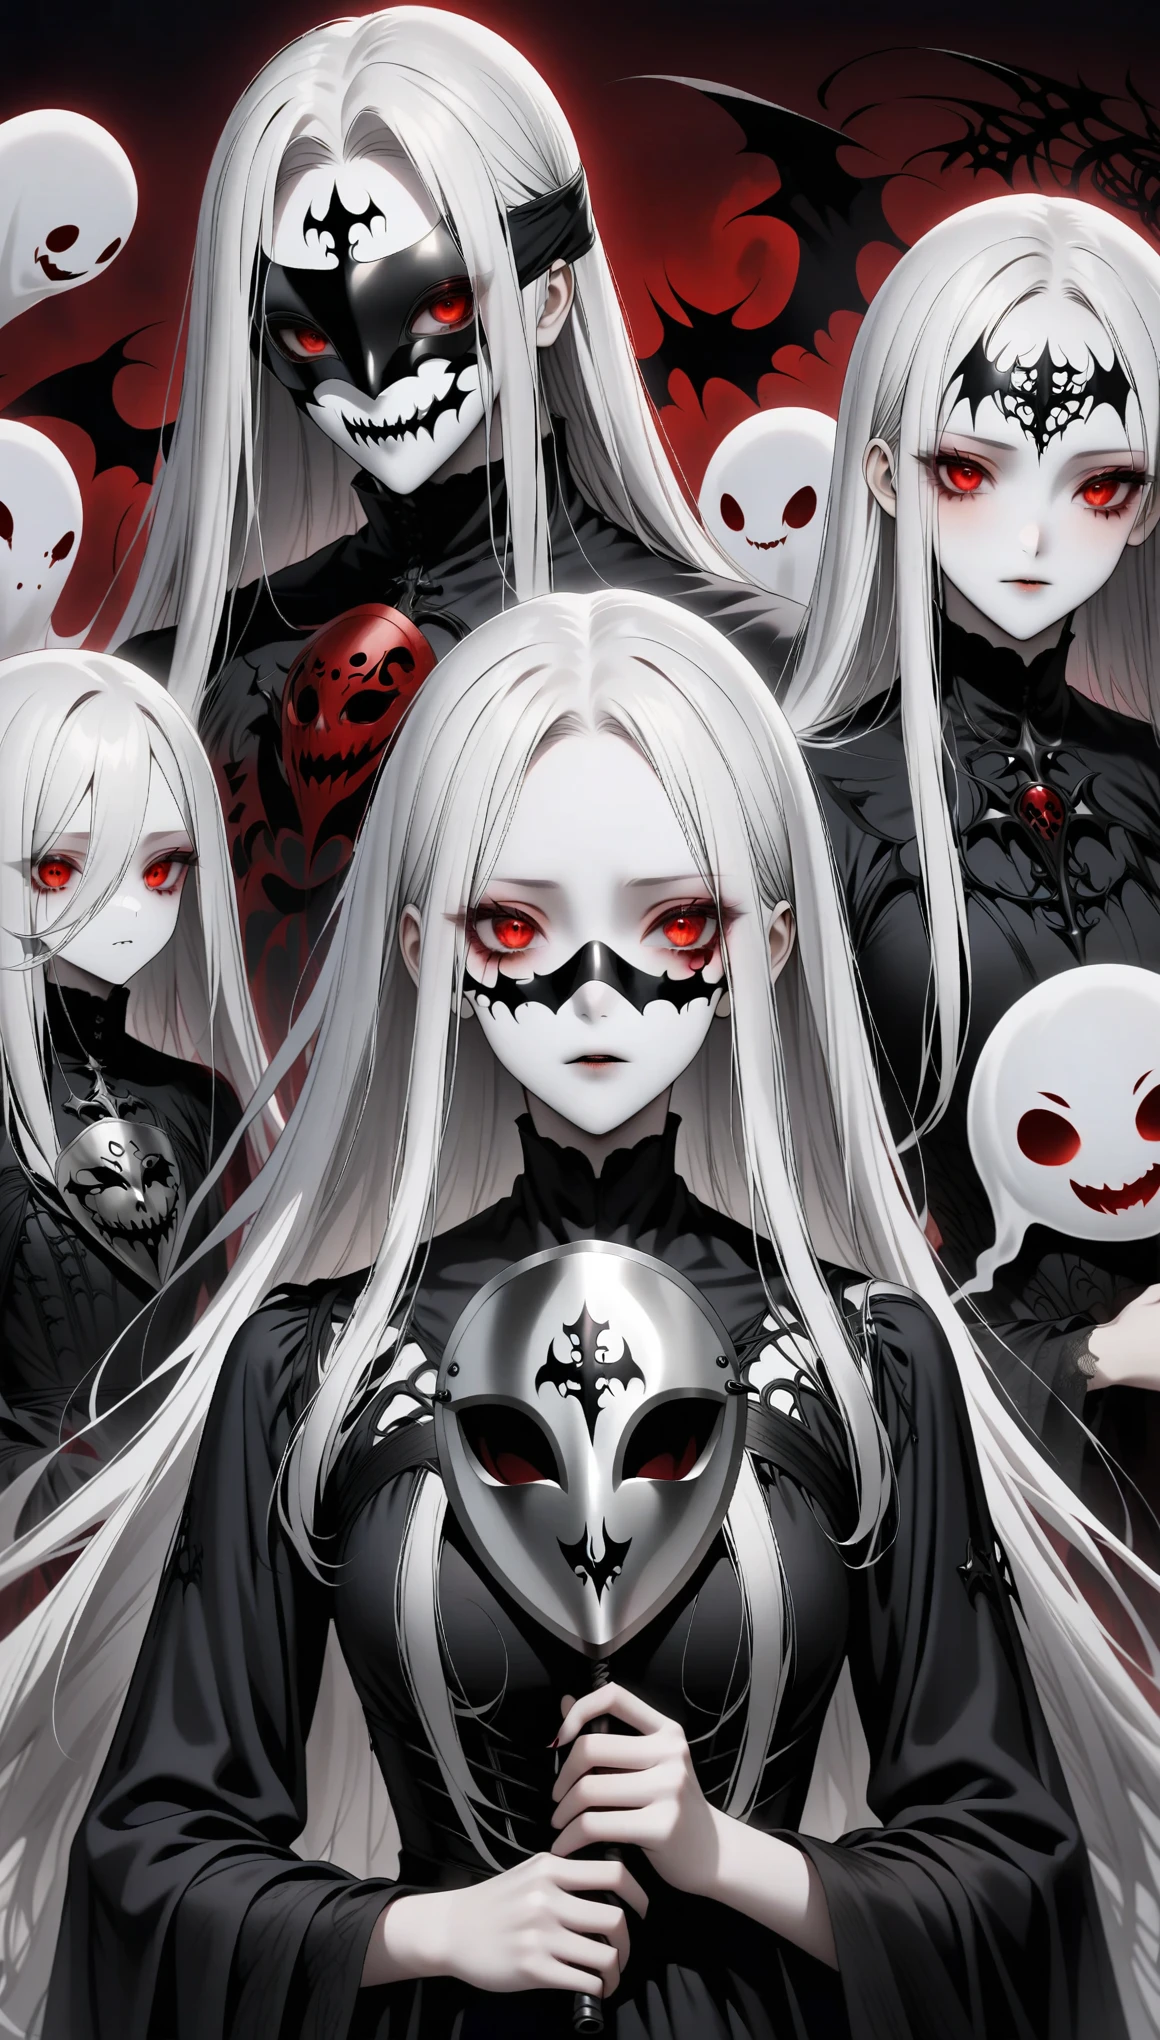 （Holding a metal mask in hand：1.5），（White-haired ghost，straight hair，red eyes），（gothic art），（fear：1.5），（Correct human anatomy：1.37）